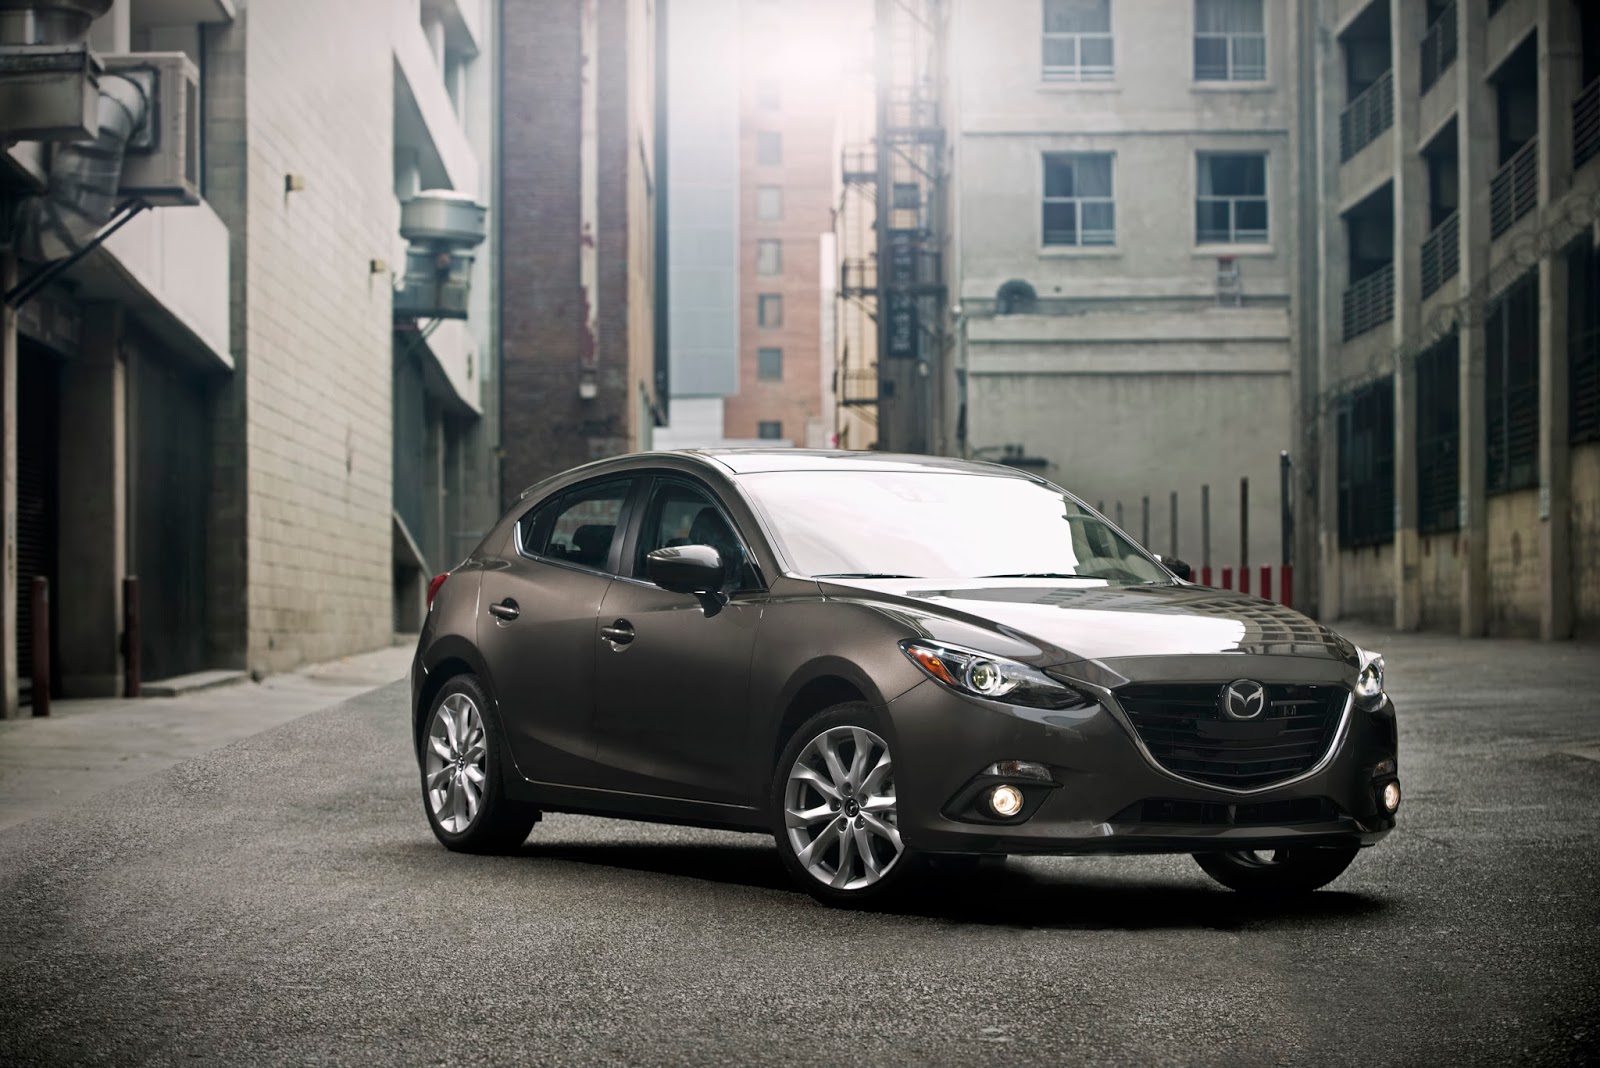 Auto Trends with JeffCars.com: 2014 Mazda3 Grand Touring Hatchback